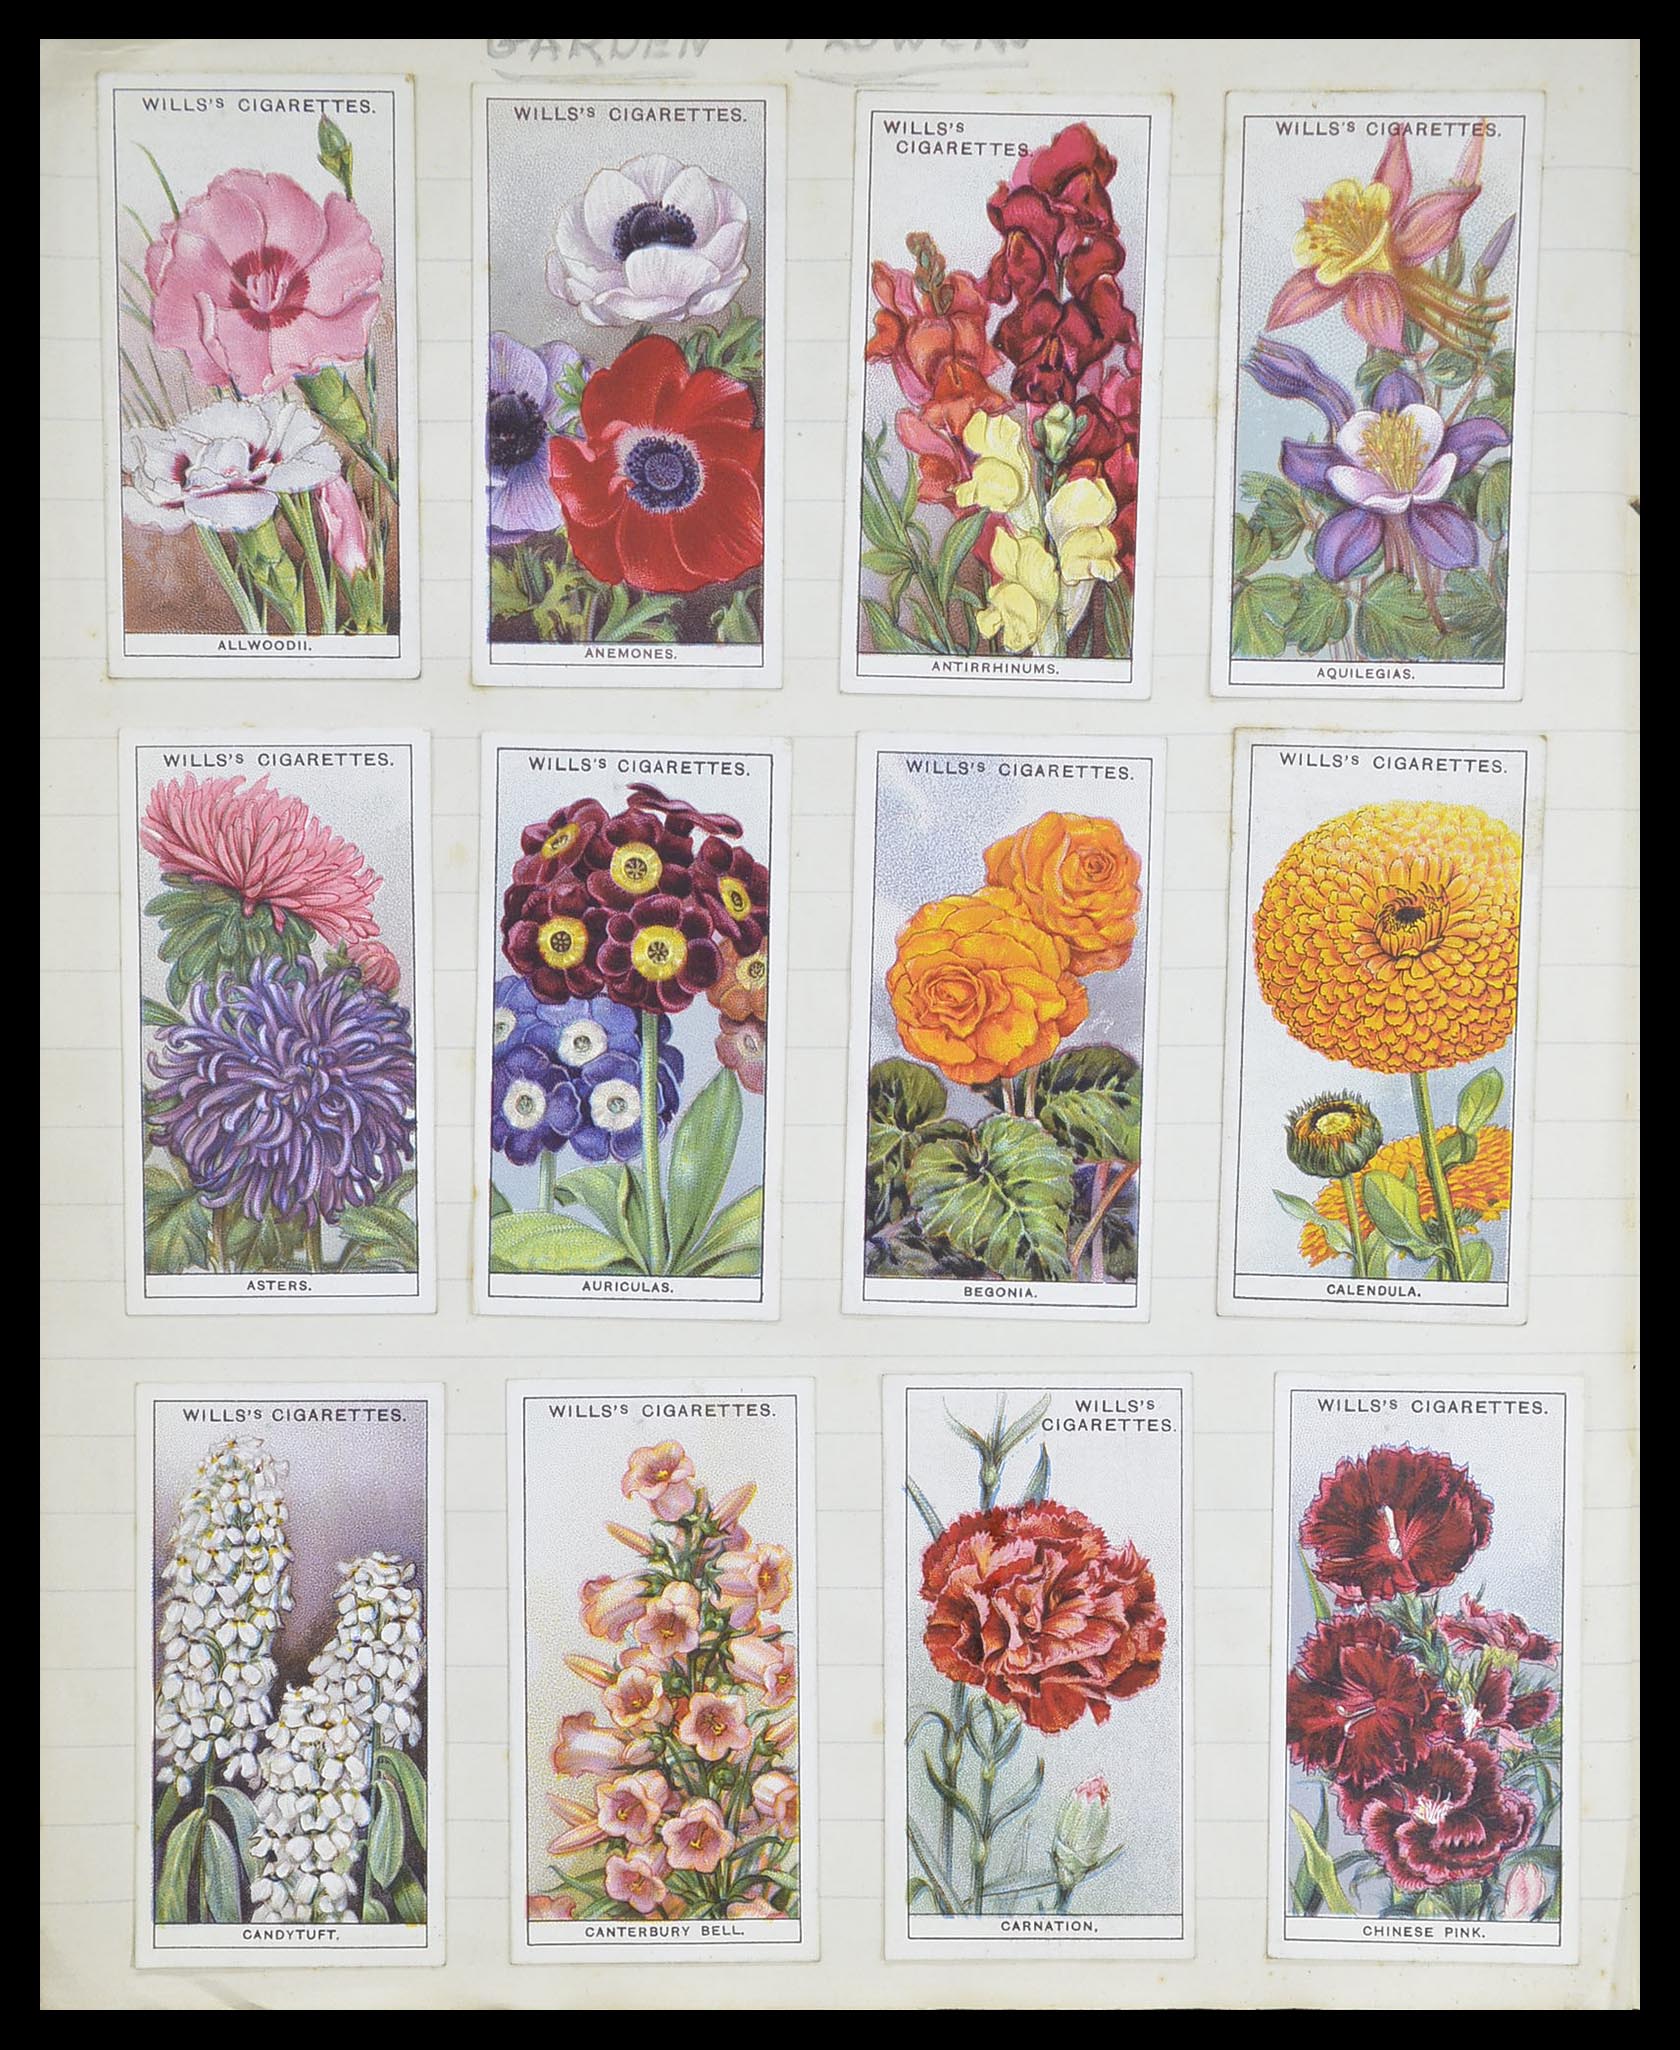 33444 074 - Stamp collection 33444 Great Britain cigarette cards.